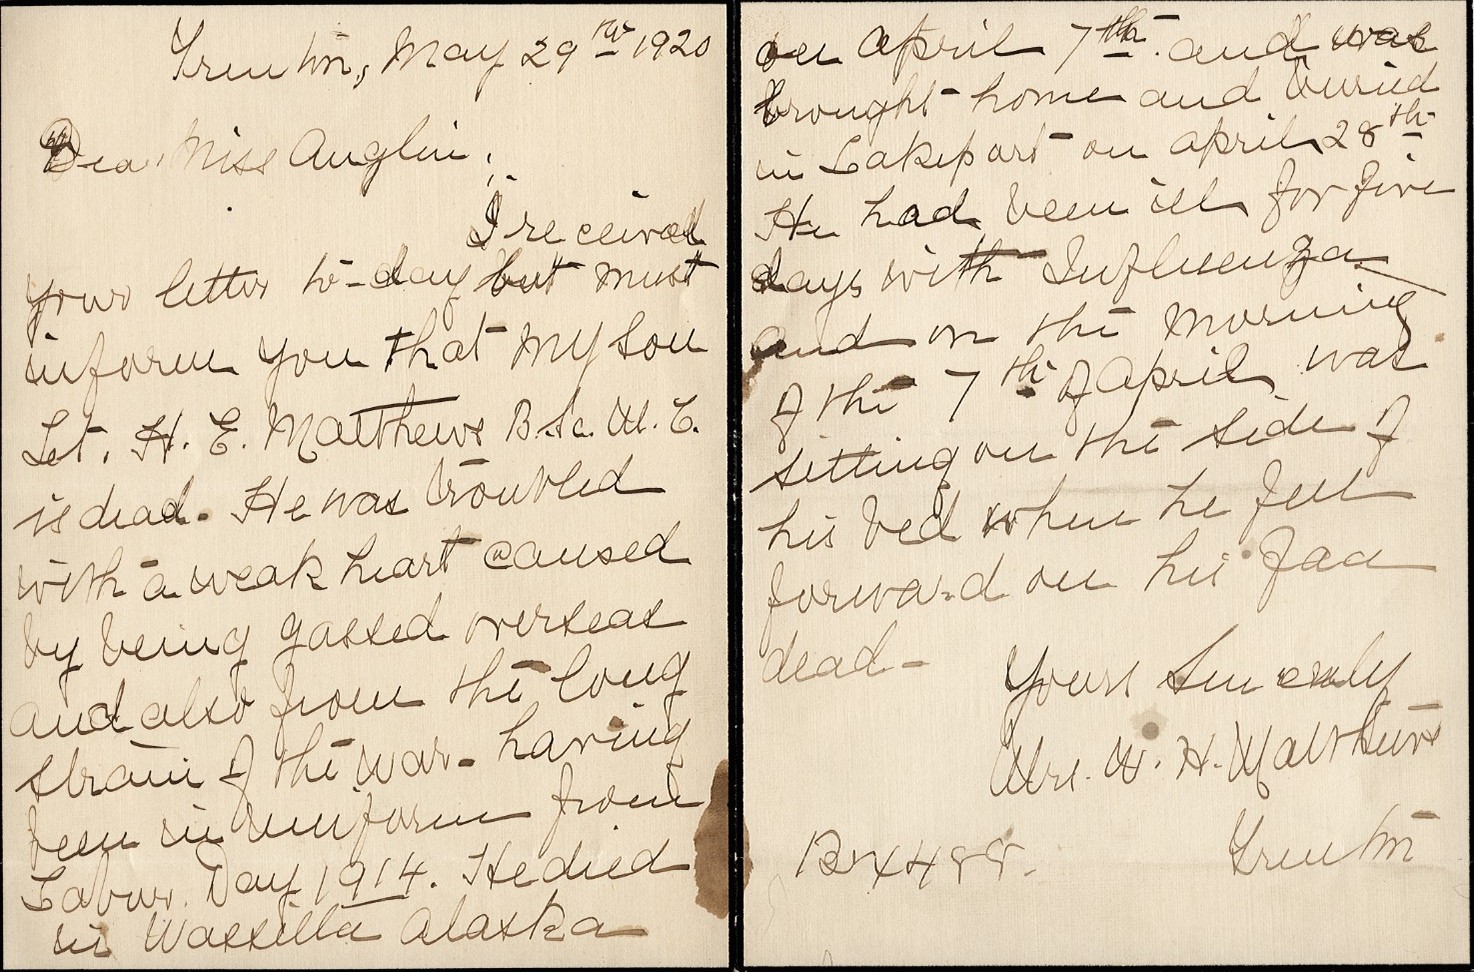 Letter from Mrs. W.H. Matthews to Miss Anglin, 29th May 1920